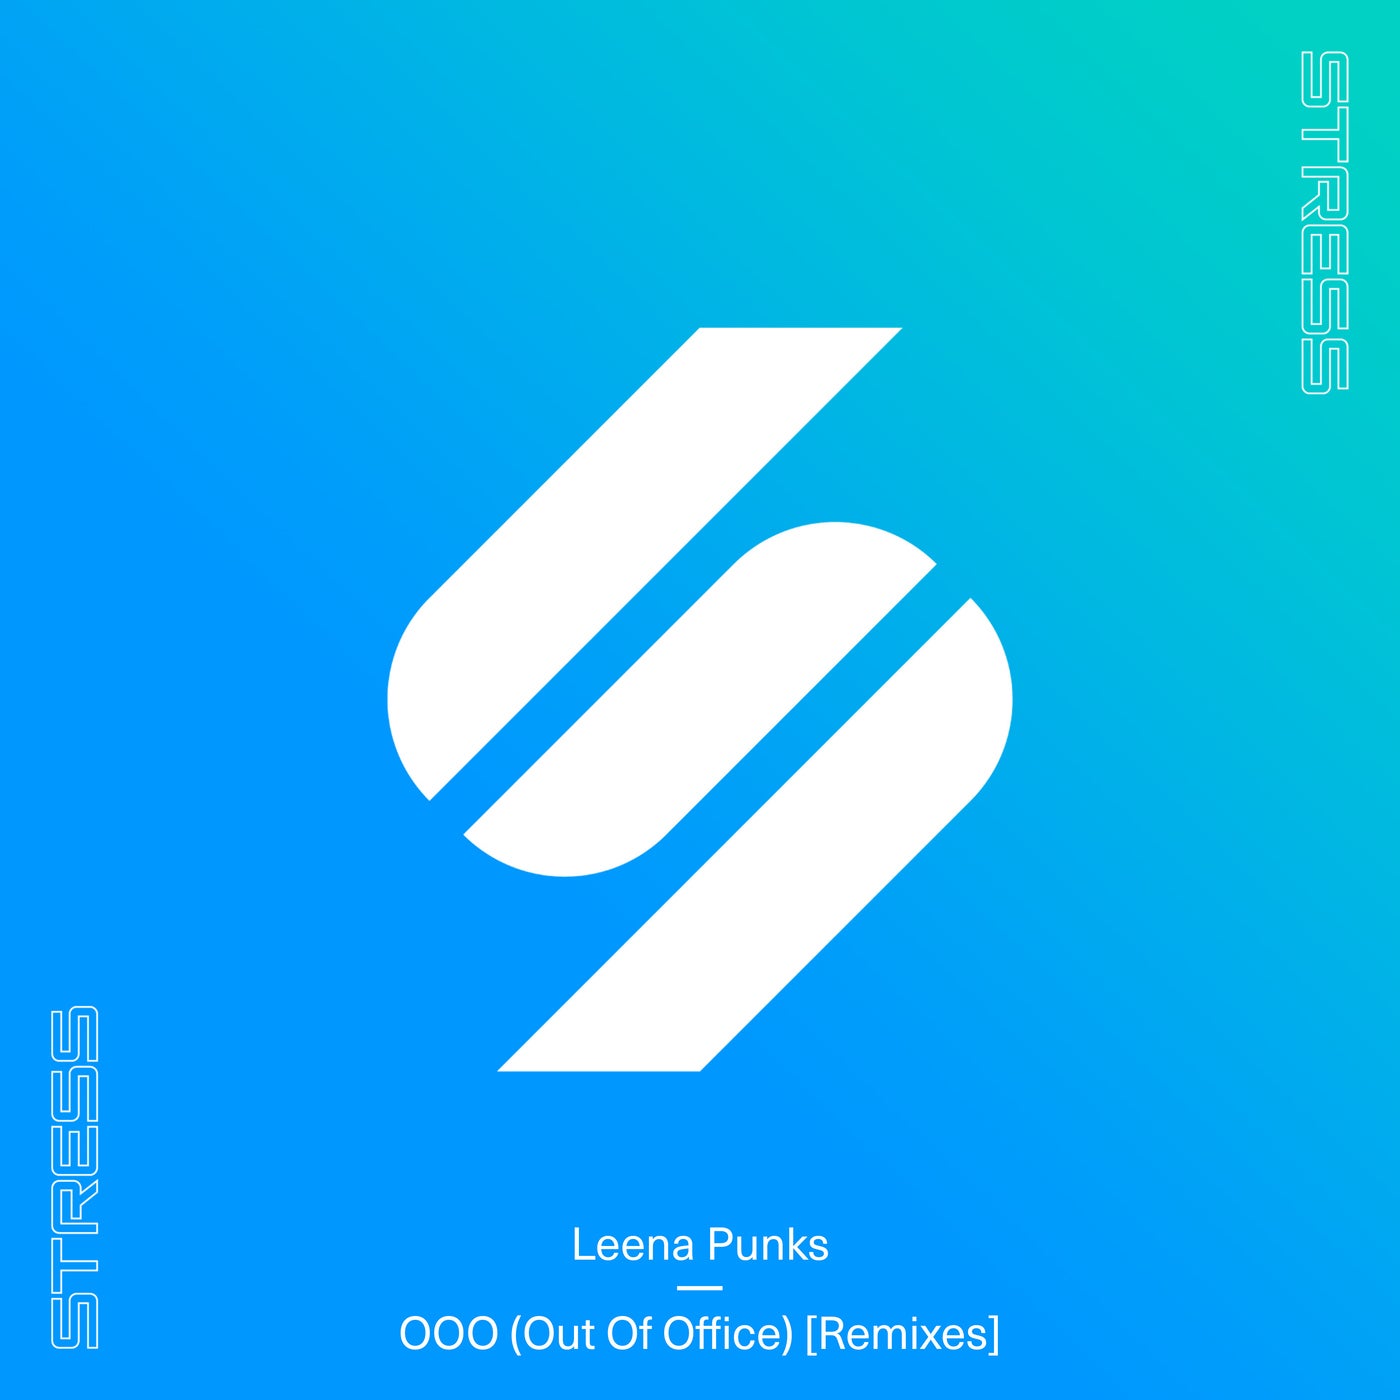 OOO (Out Of Office) [Remixes]